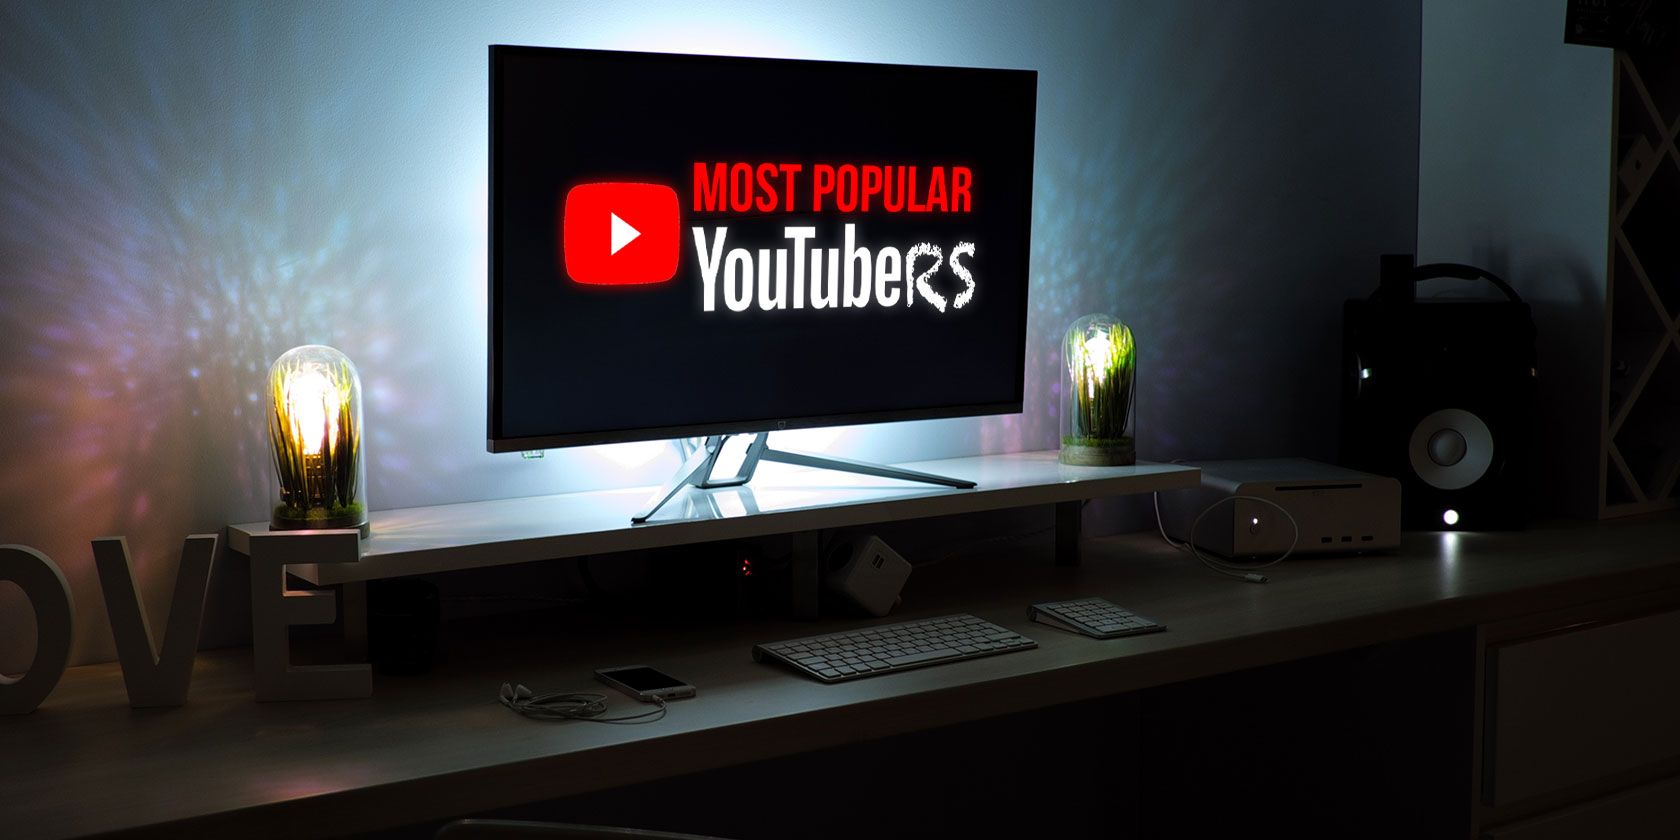 The Top 10 Most Popular YouTube Channels by Subscribers